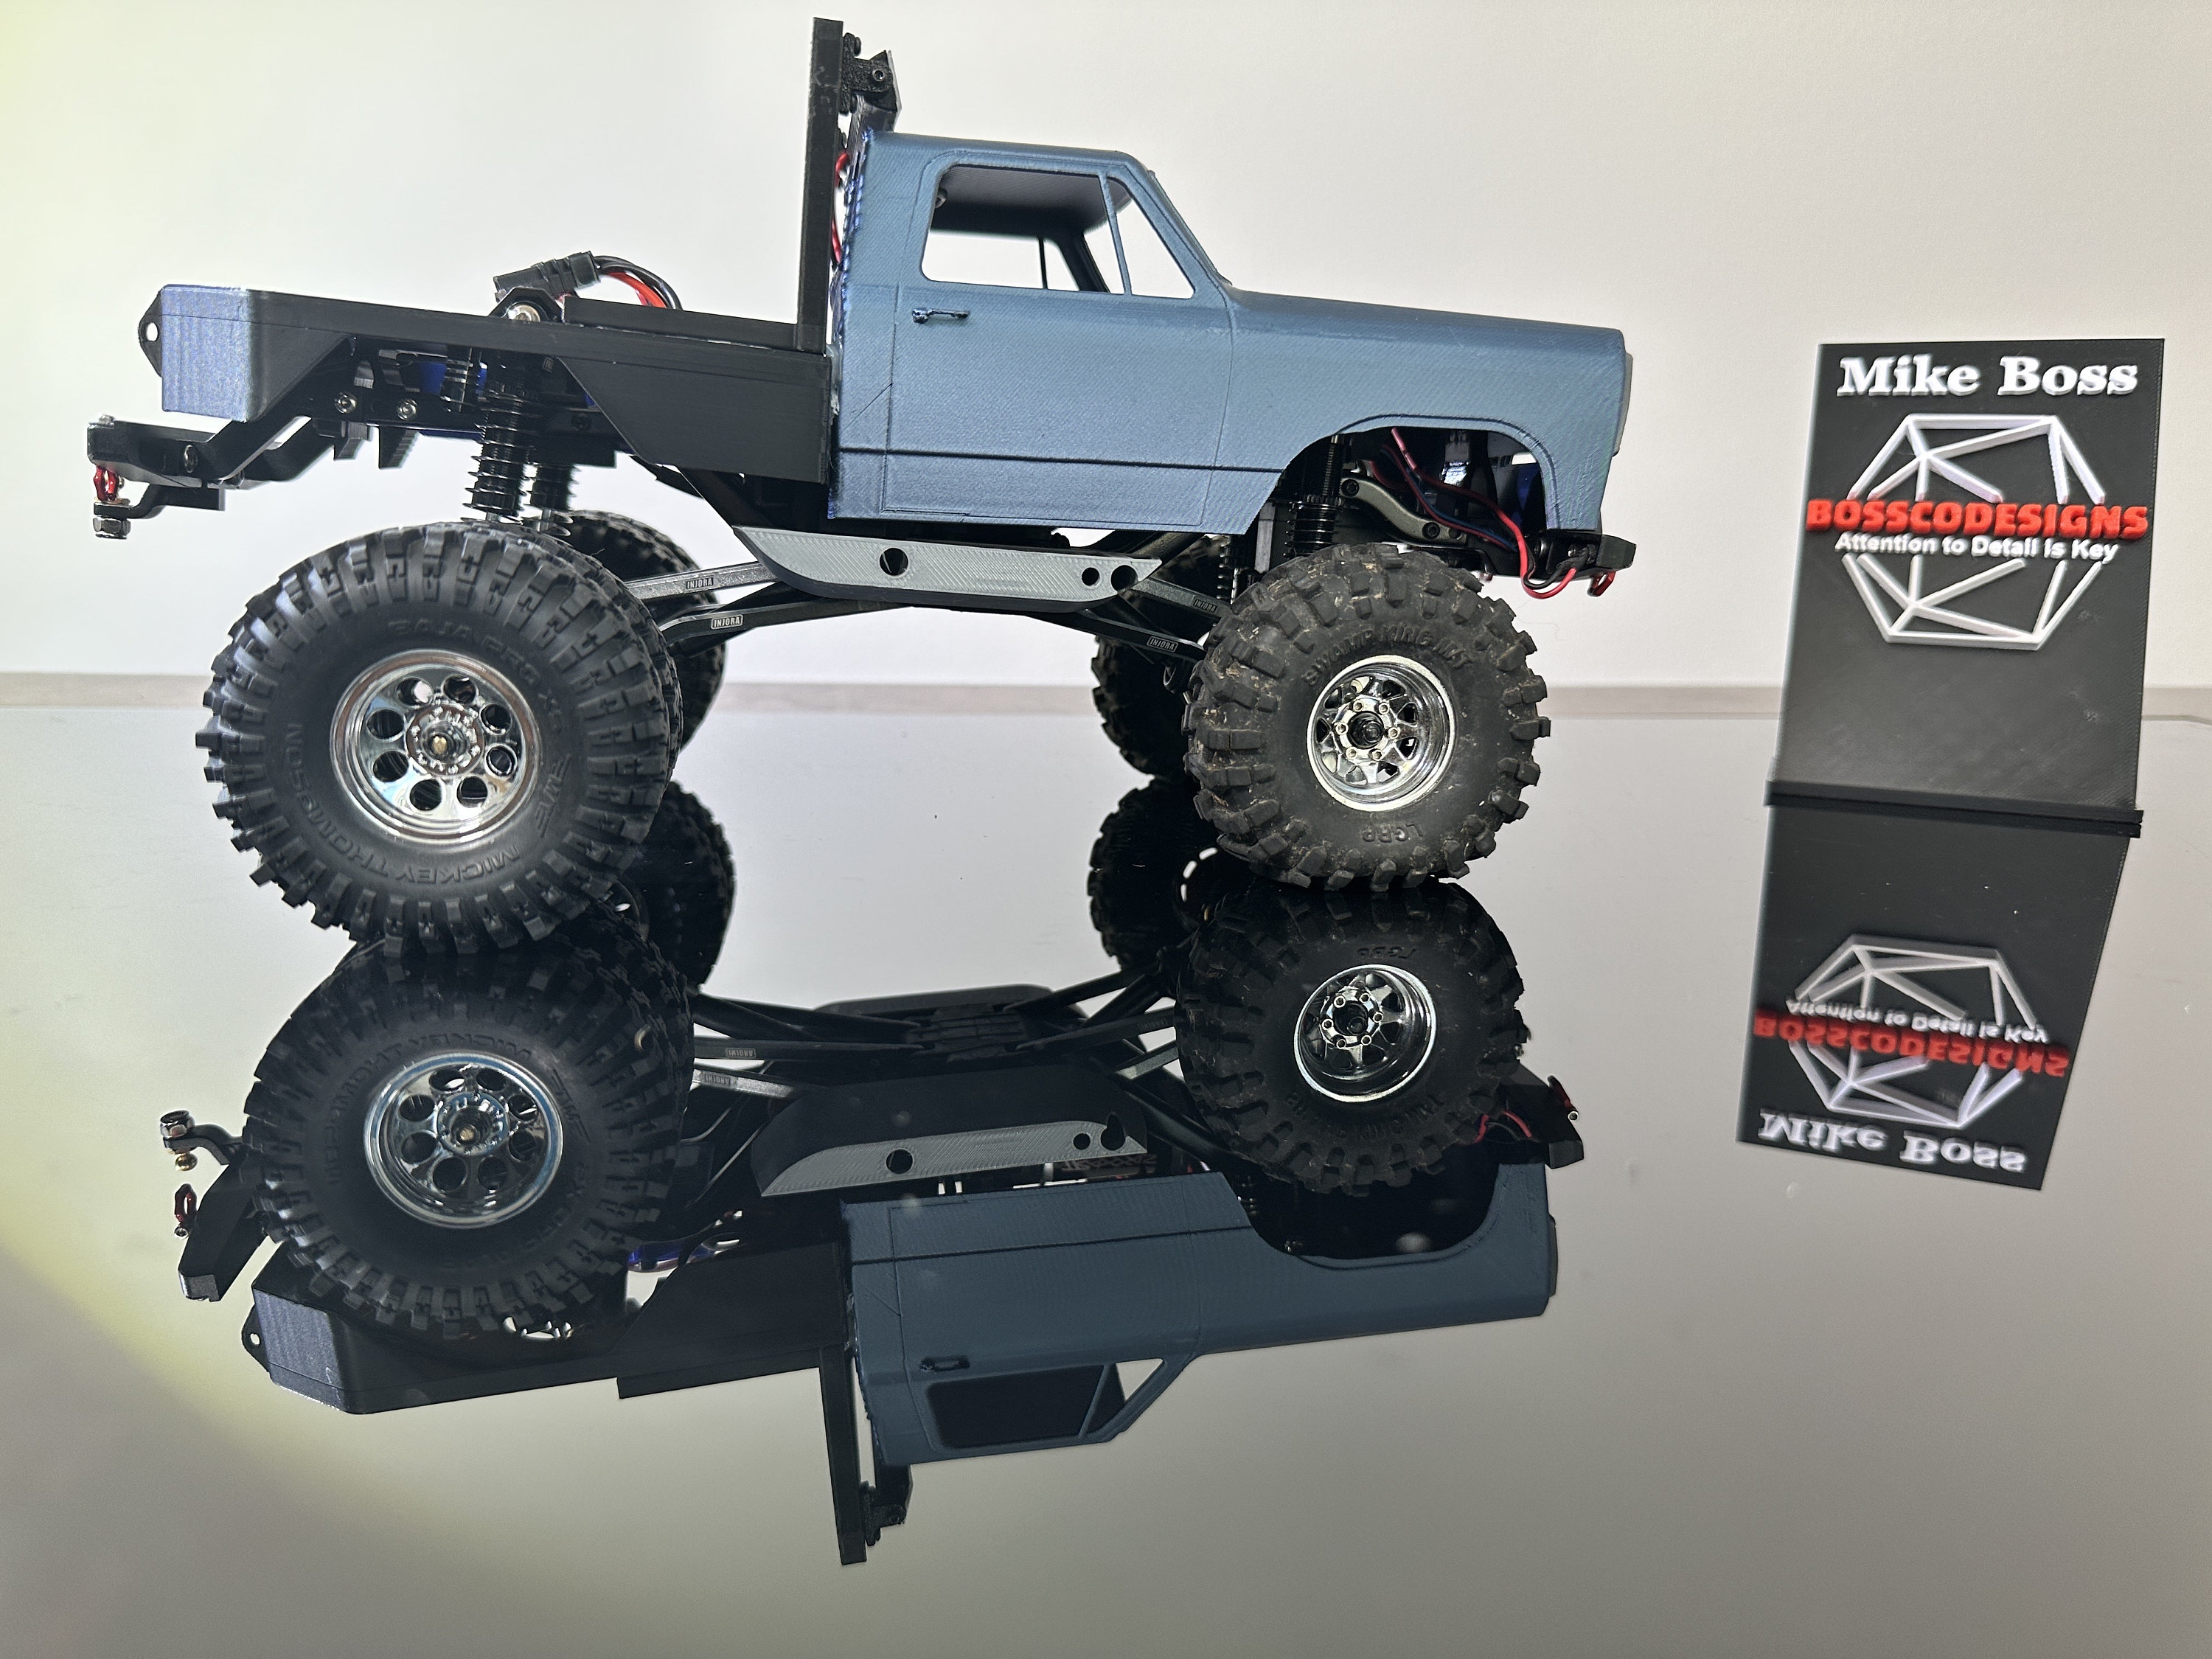 TRAXXAS 1/18TH TRX4M DEFENDER GRAY! - Excell Hobby